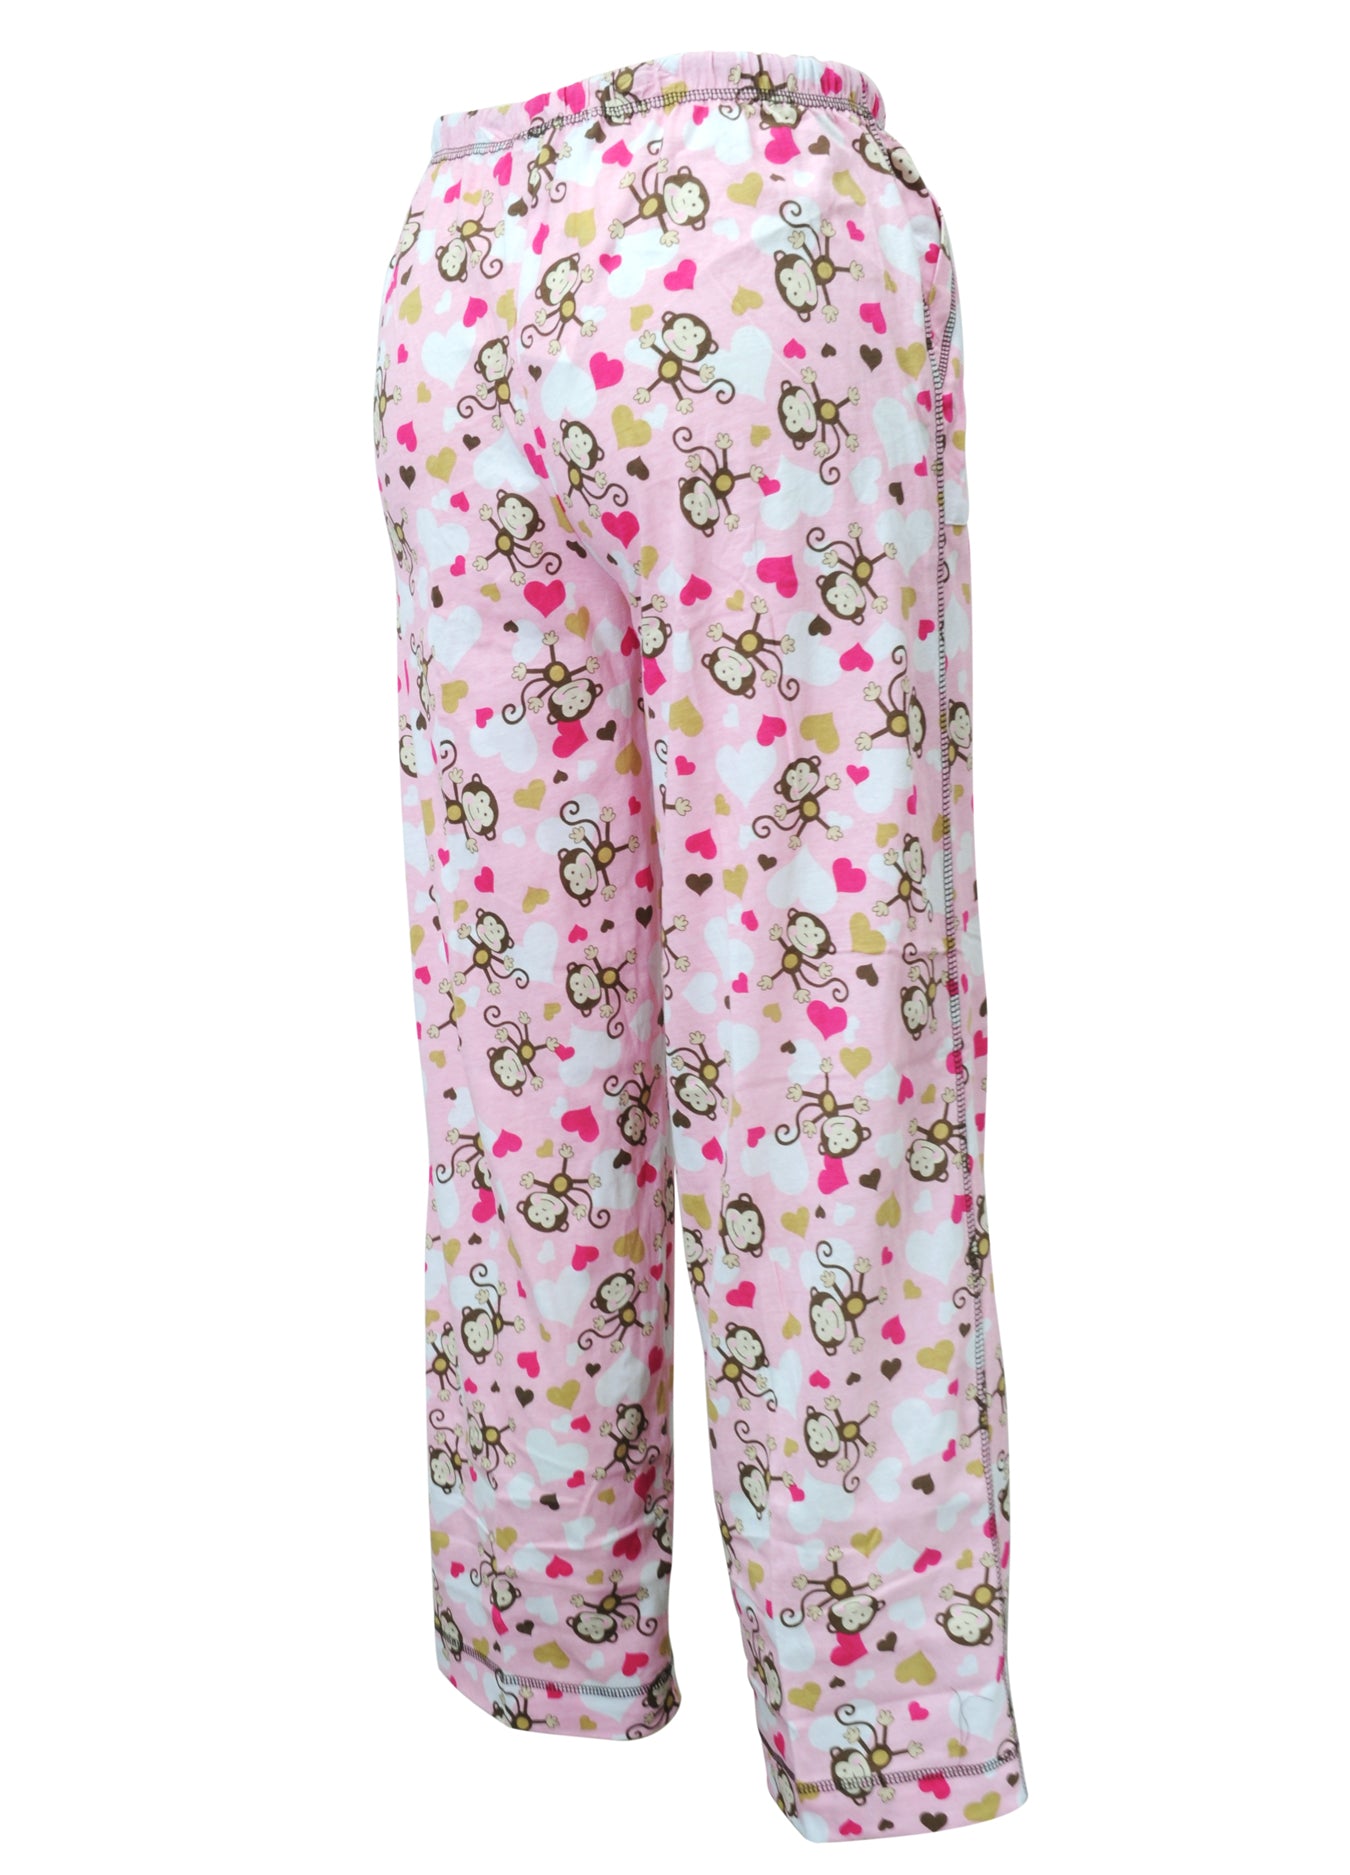 ASOS DESIGN Petite cotton pajama pants with exposed waistband and picot  trim in lilac | ASOS